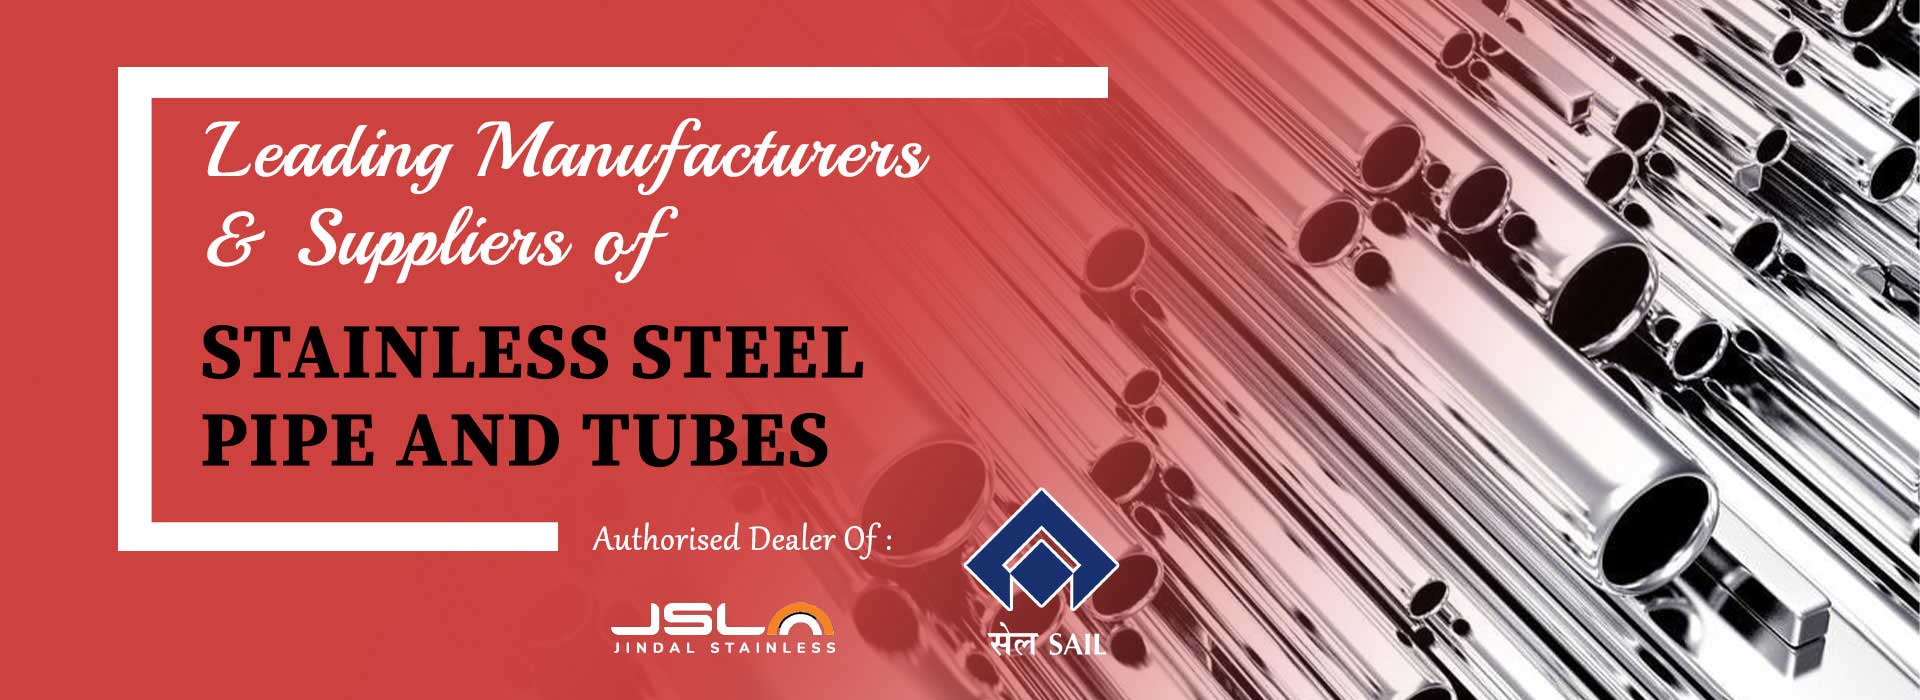 Stainless Steel Pipe and Tubes Manufacturers in Faridabad